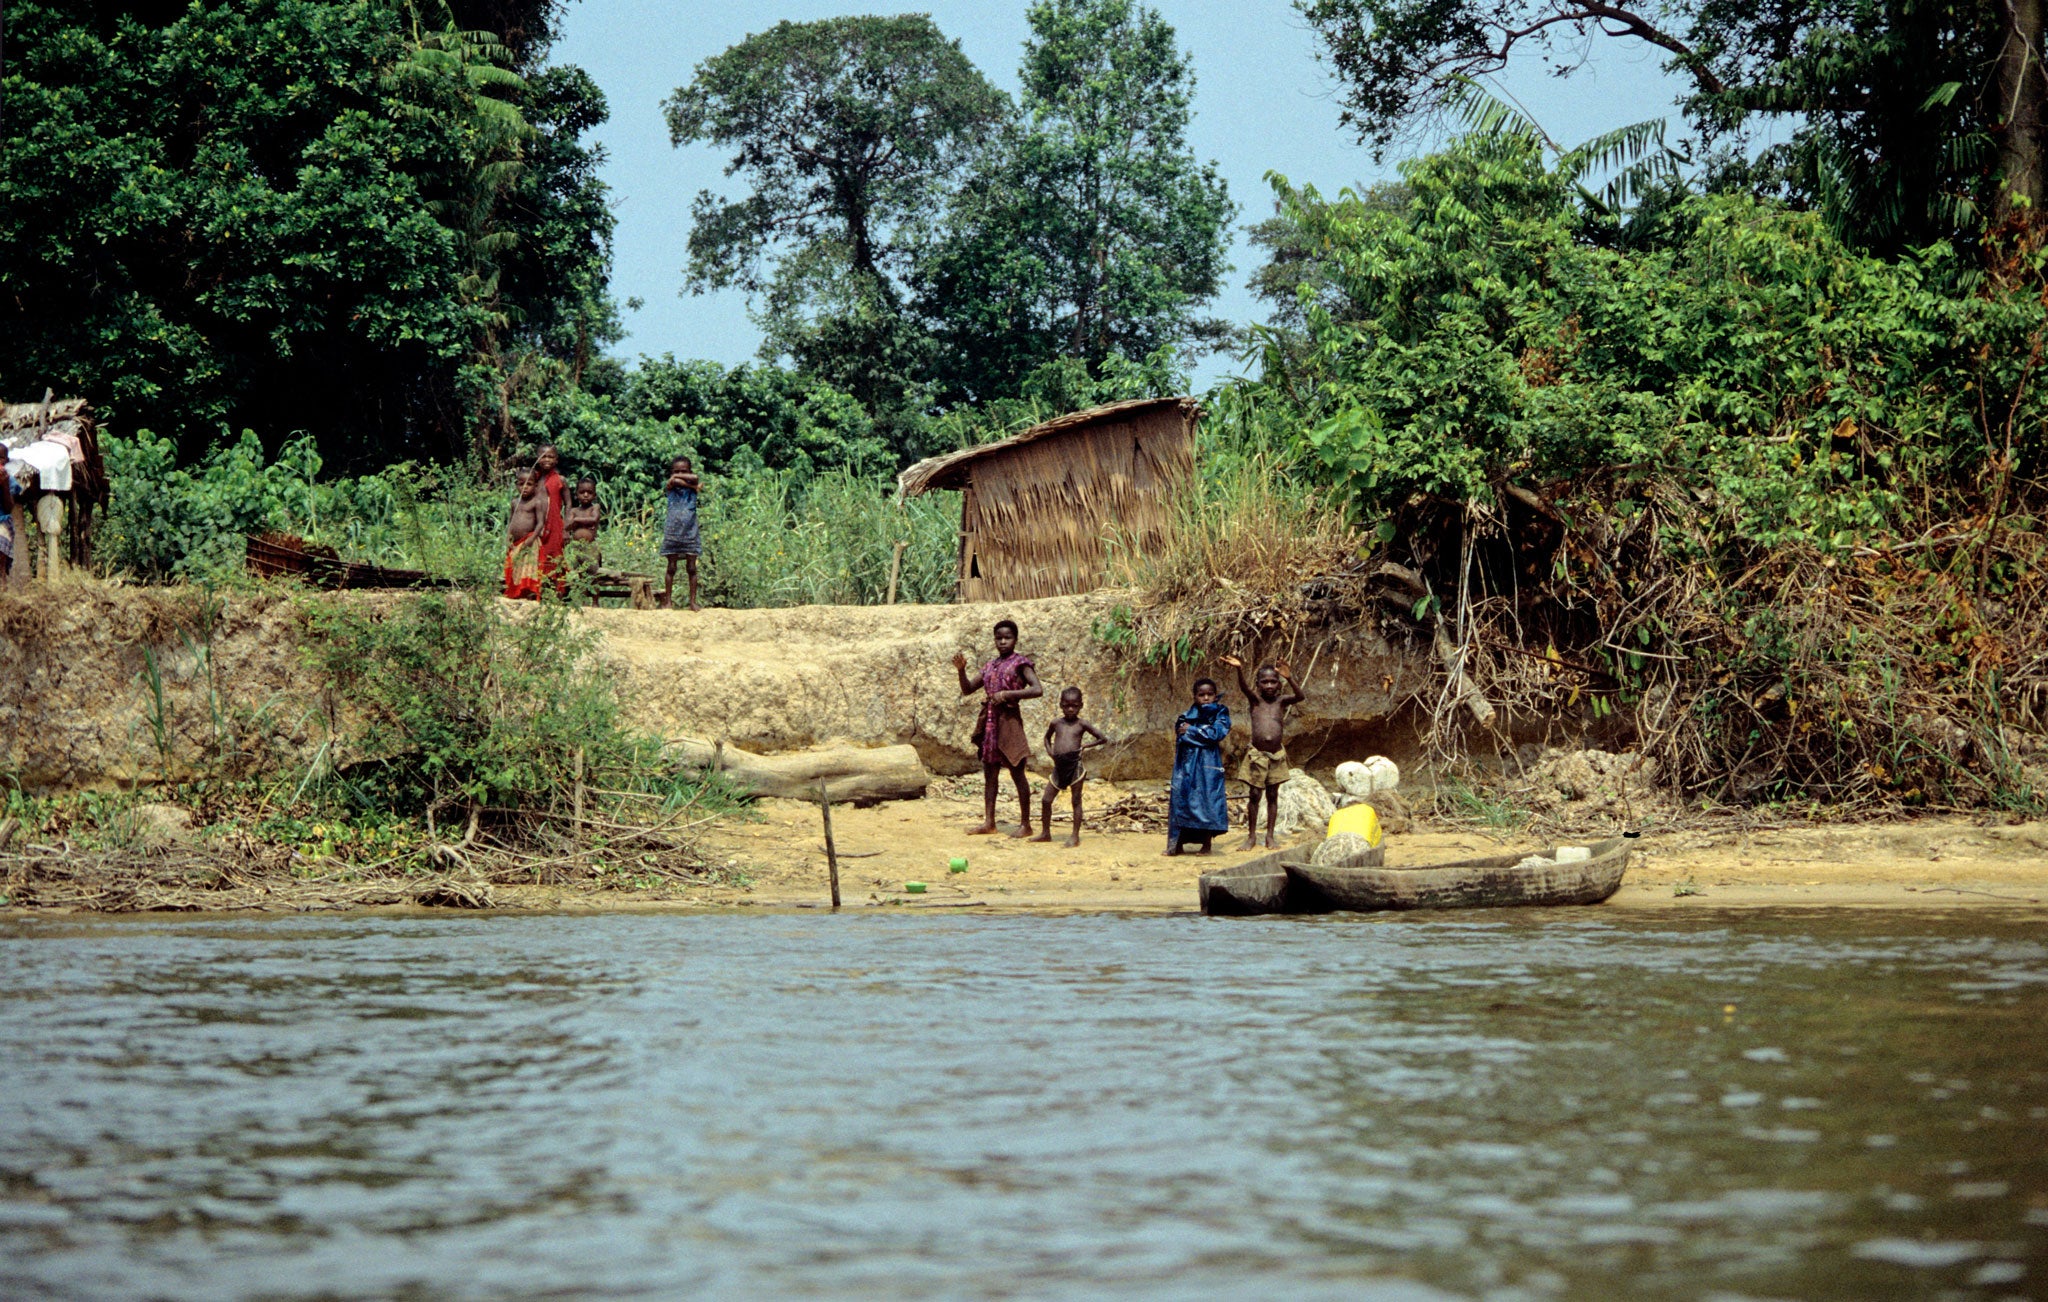 African paradise lost? A settlement along the Congo river, Republic of Congo